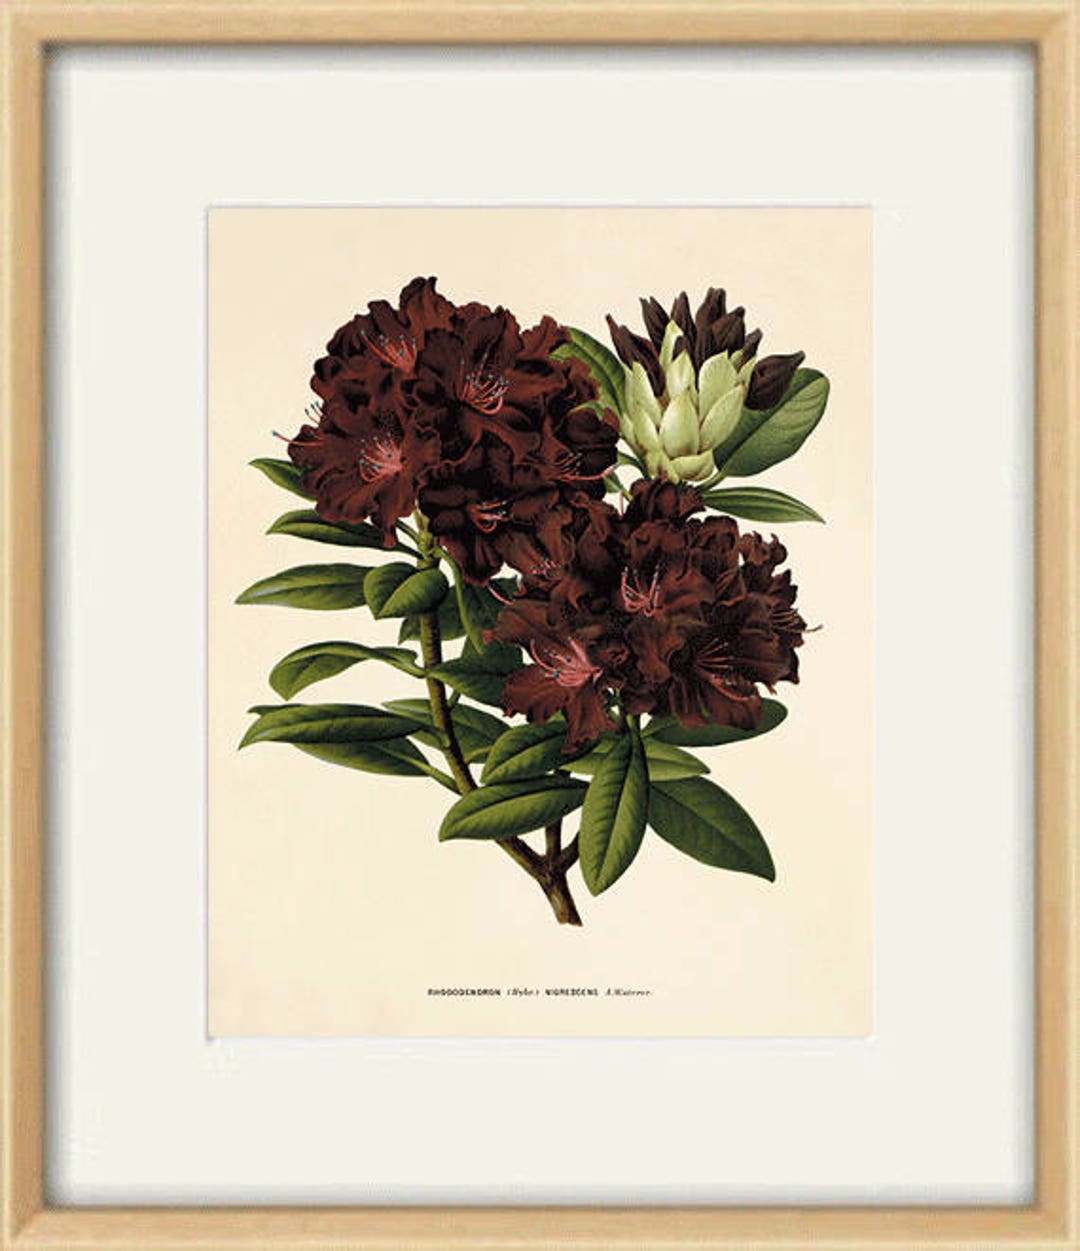 Rhododendron Art Antique Botanical Art Prints Home Decor Wall - Etsy